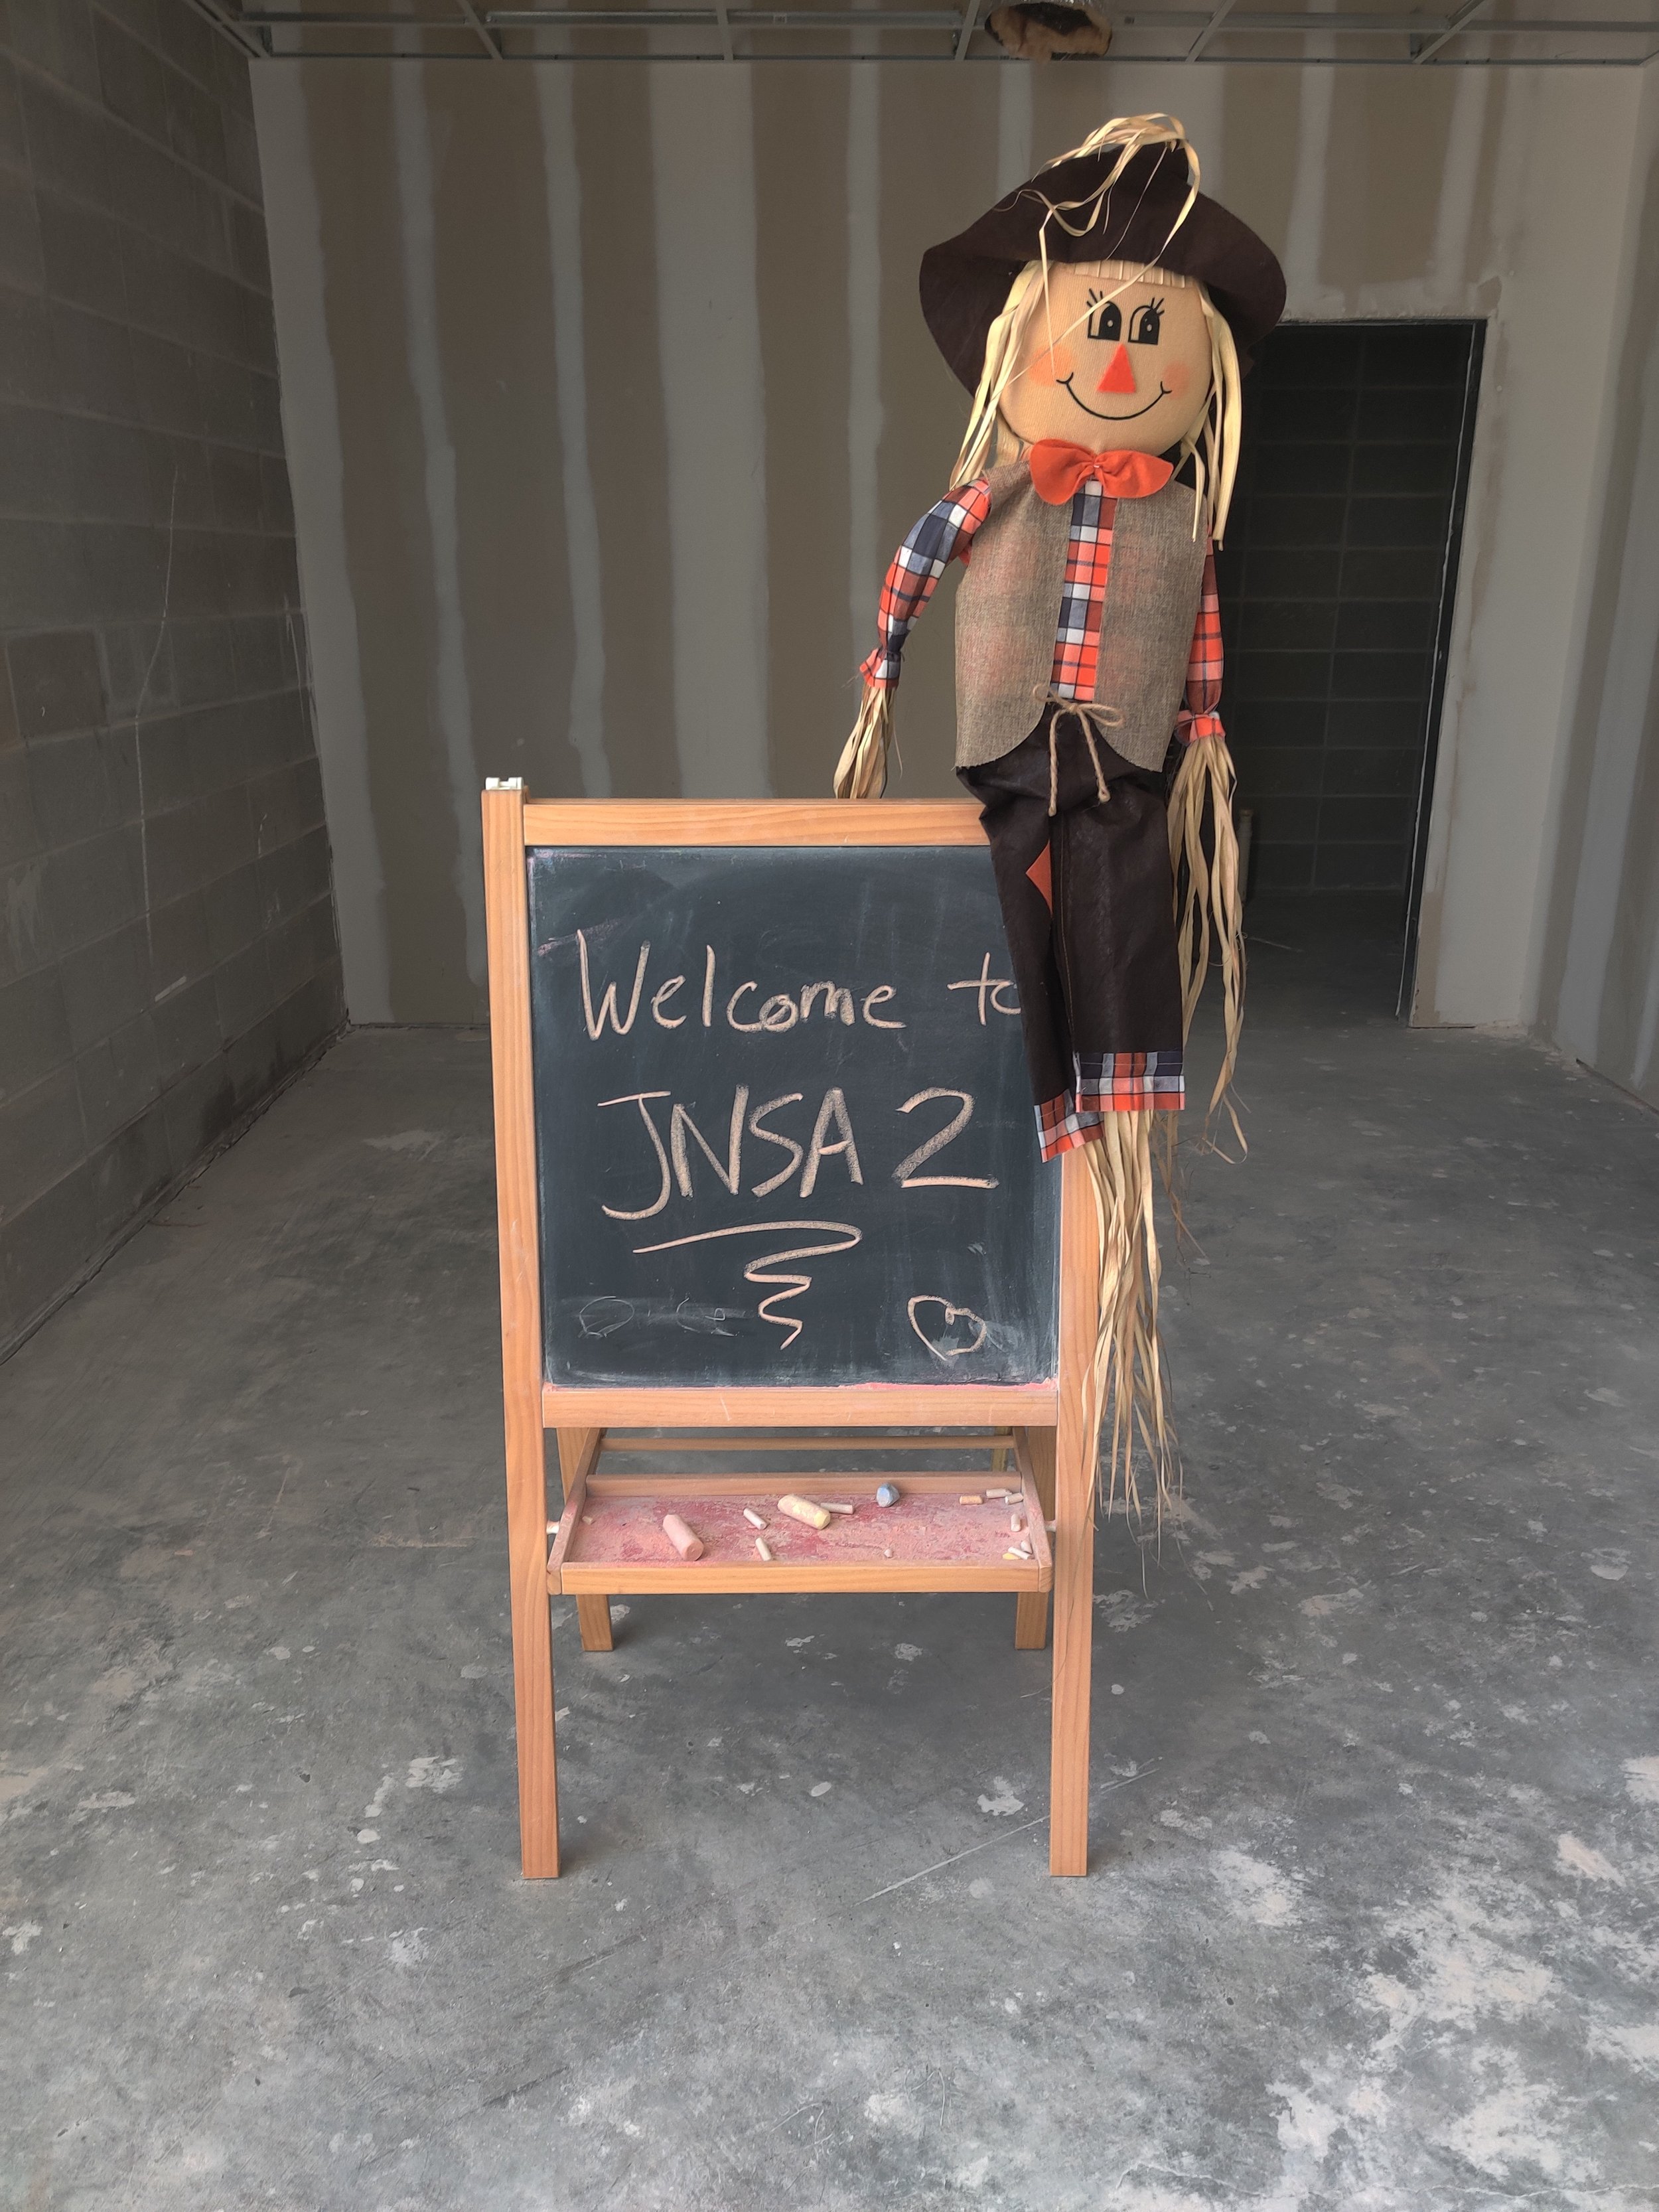 Welcome to JNSA 2